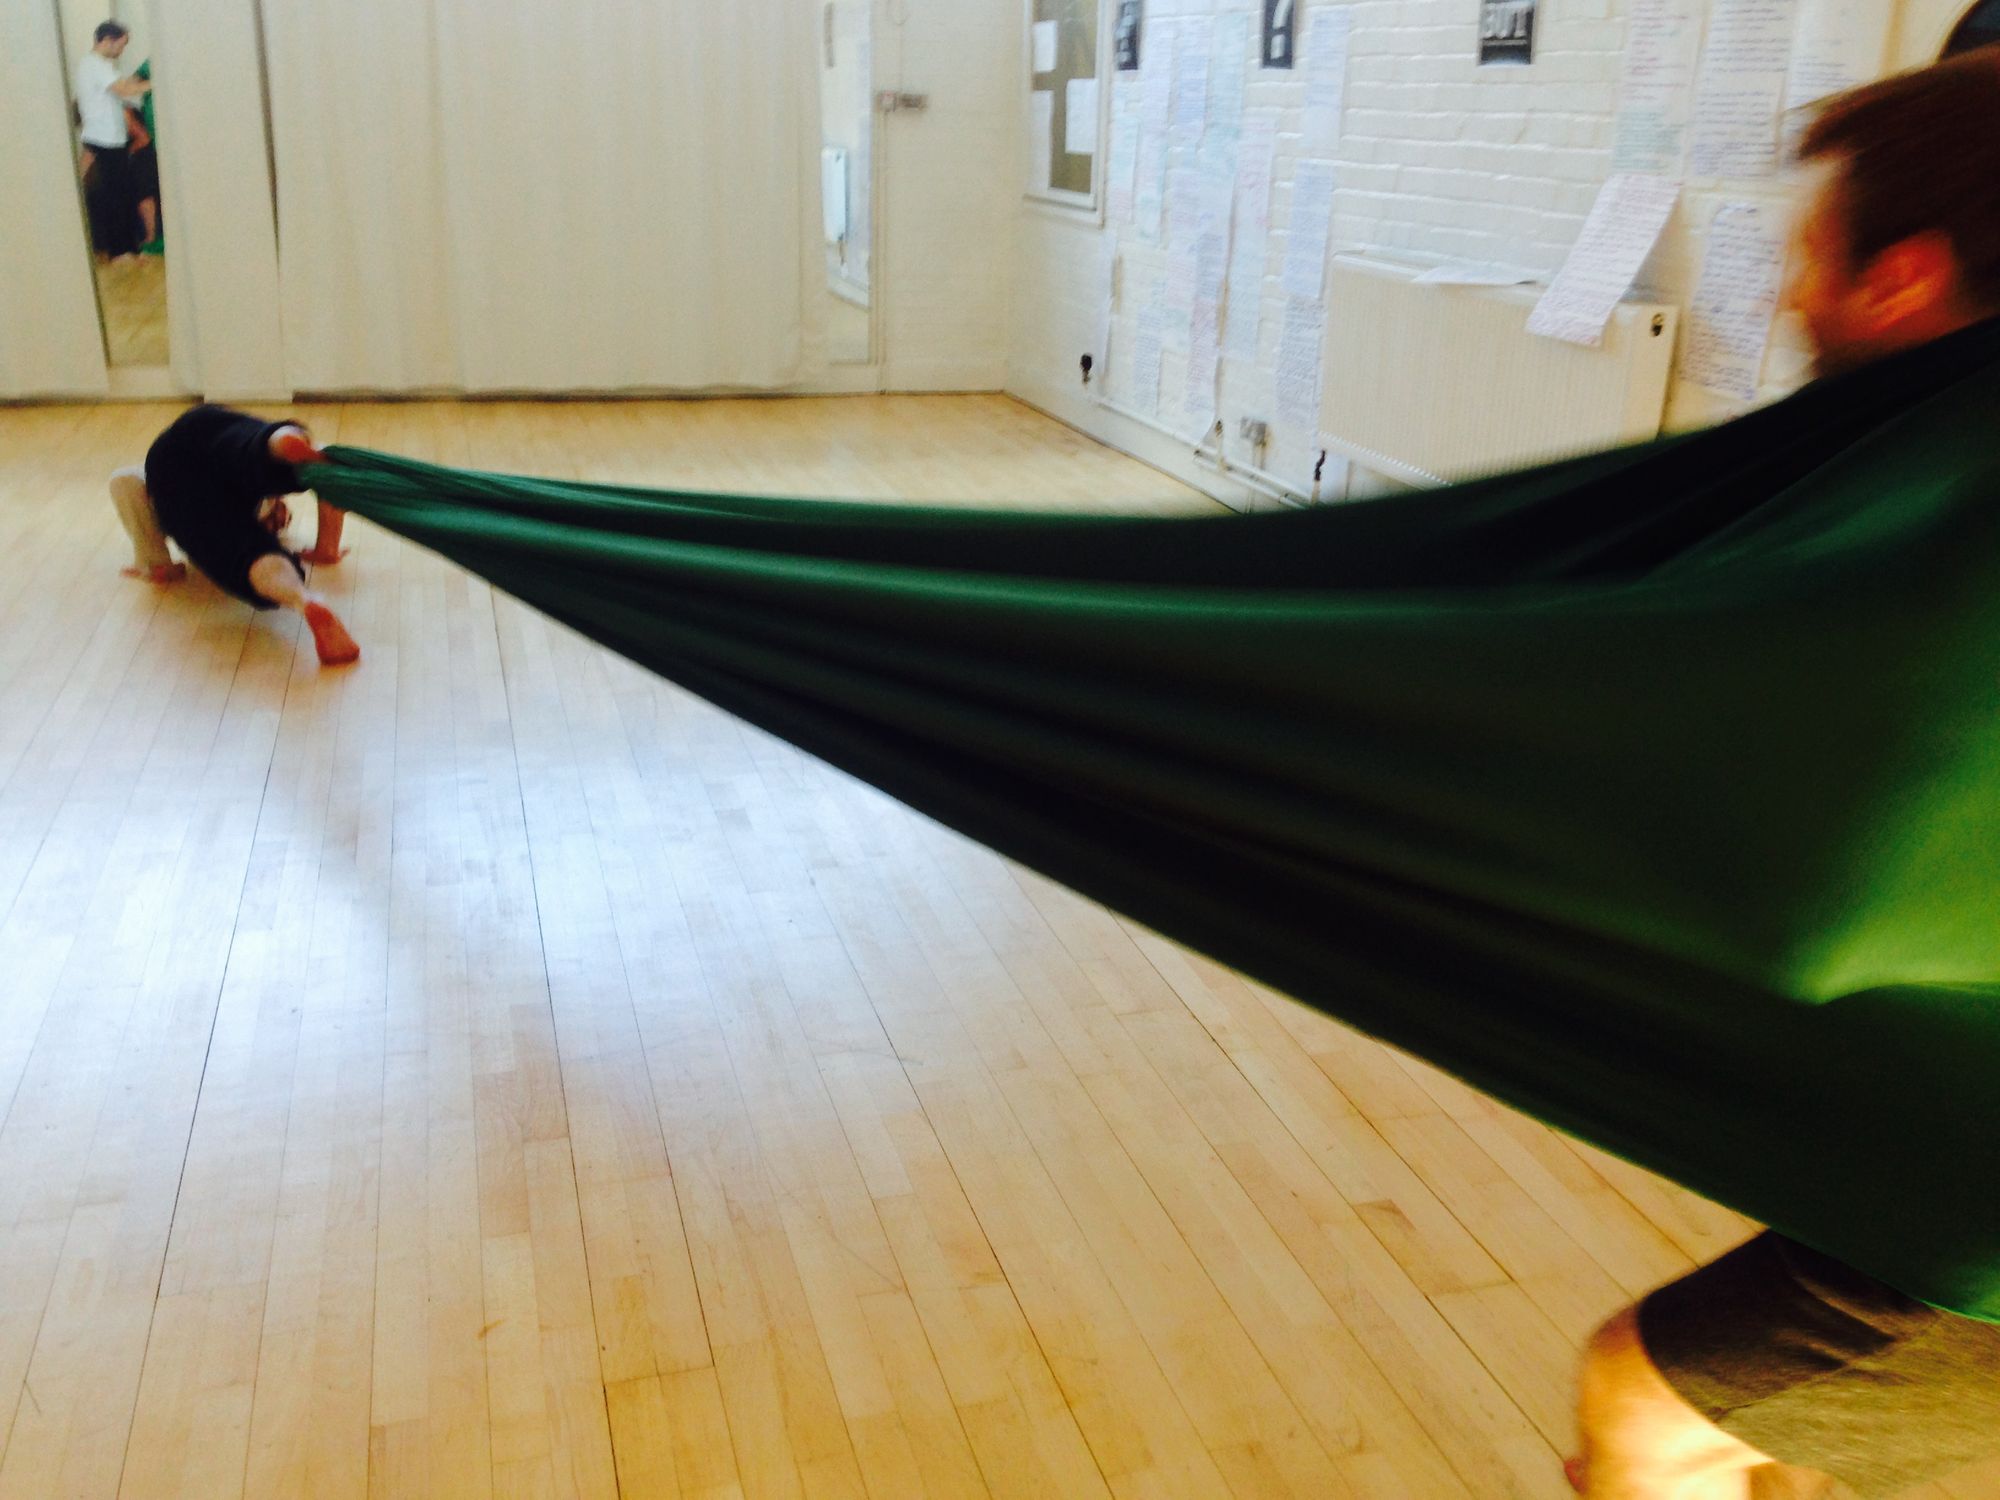 Working with Lou on interactive experience Invisible Treasure and thinking about risk in theatre. Ed and Barra, two young white men, play in a long stretchy loop of green material that Lou uses in her practice and brought to the devising room.